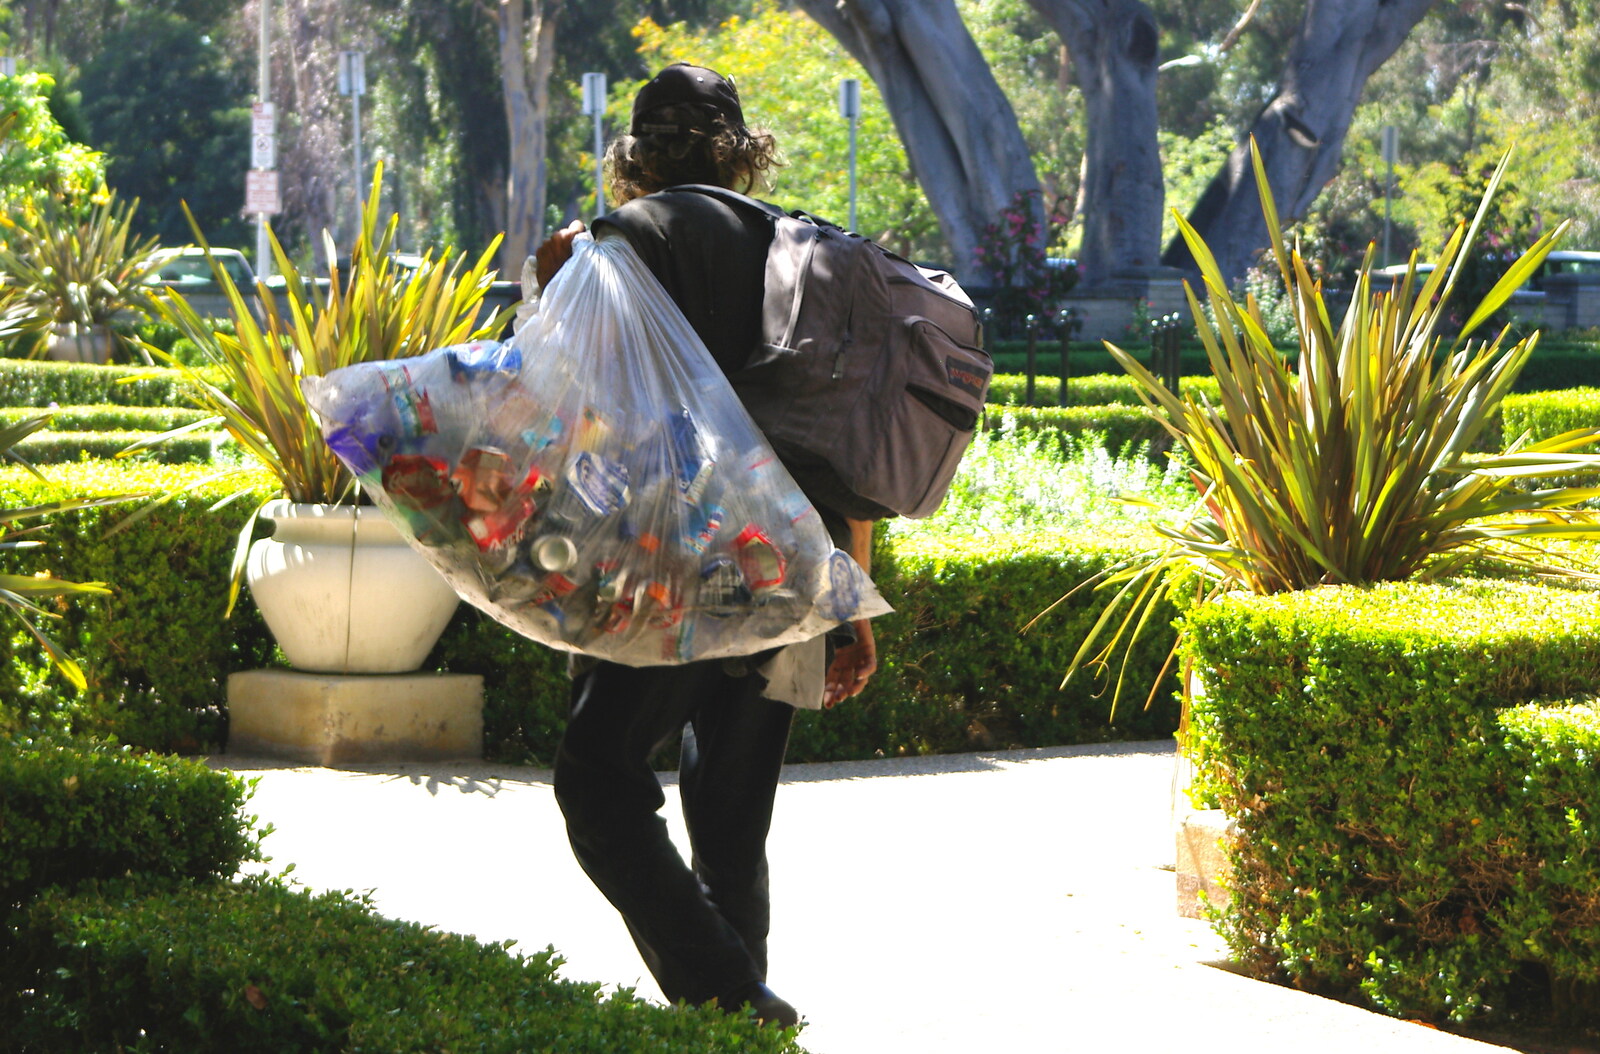 Scenes and People of Balboa Park, San Diego, California - 25th September 2005: A dude with a big sack of cans